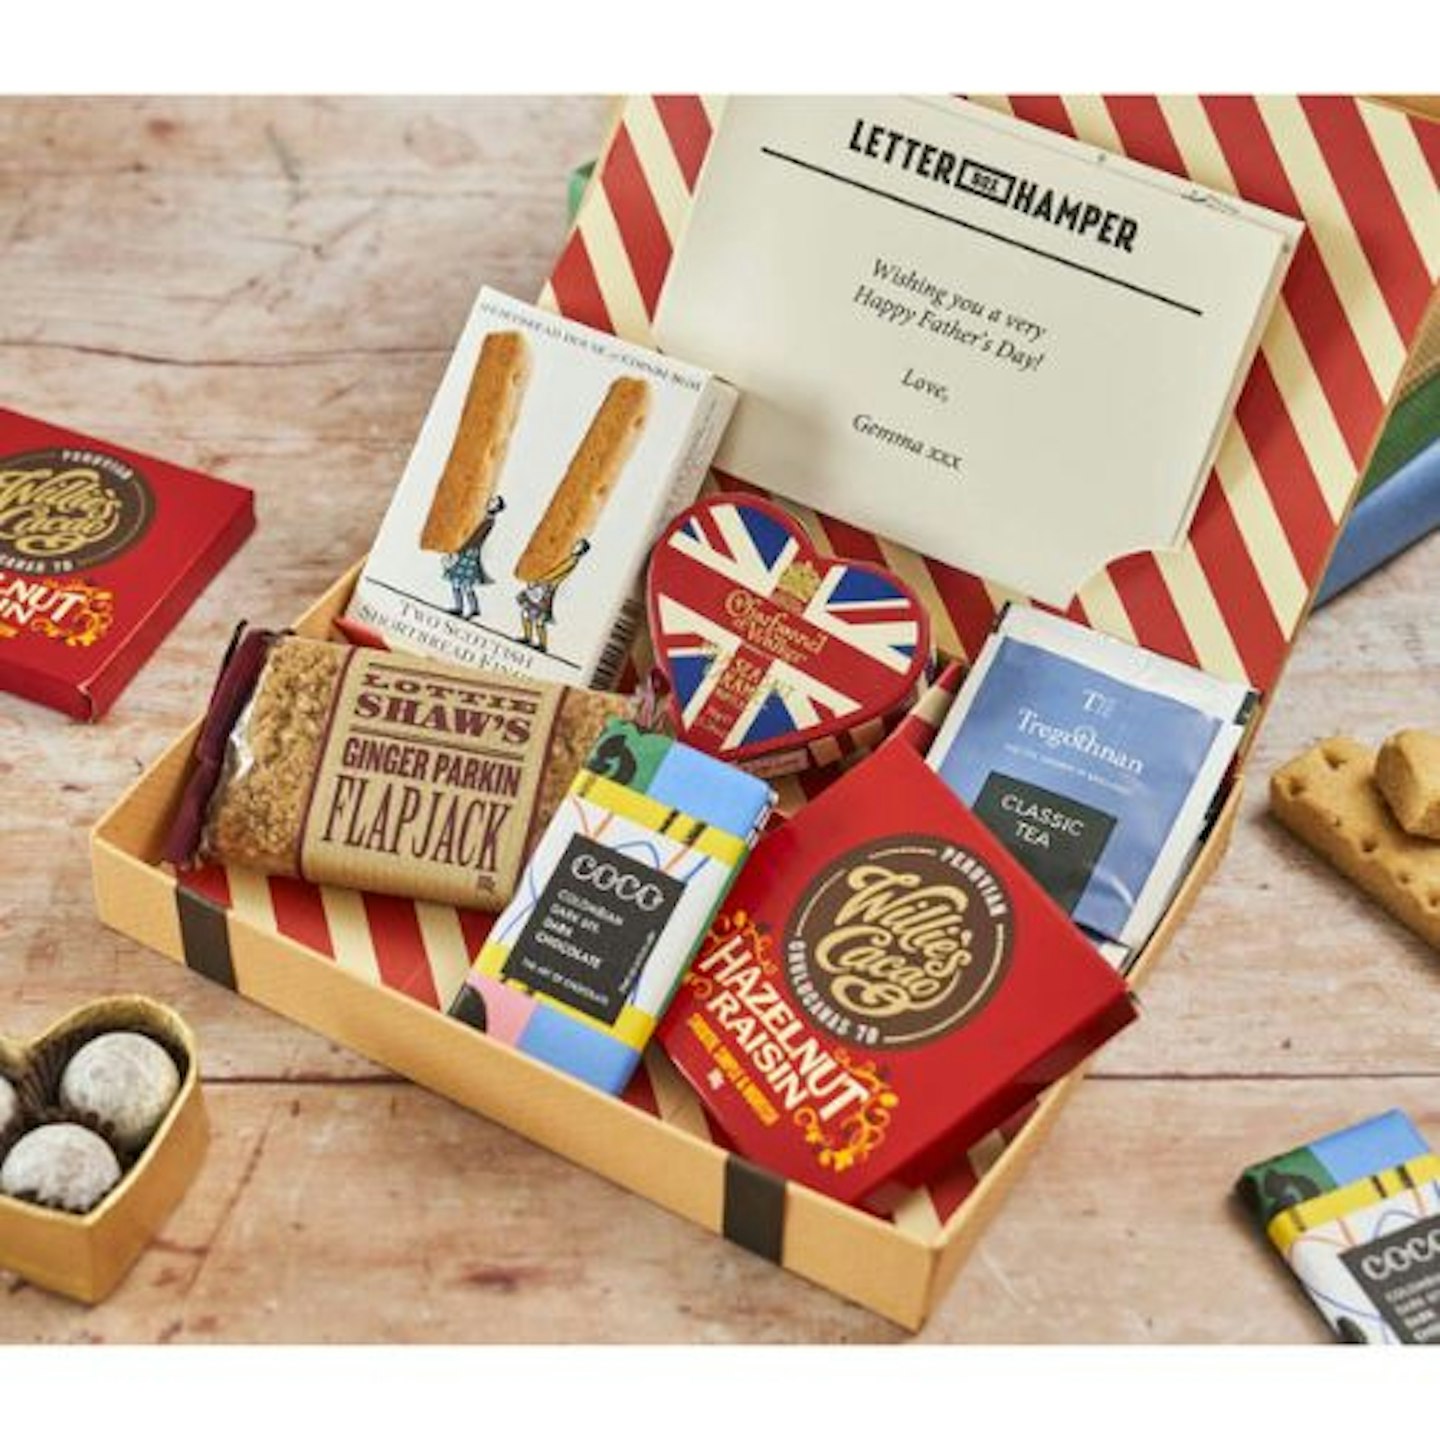 best-fathers-day-gifts-next-day-letterbox-hamper